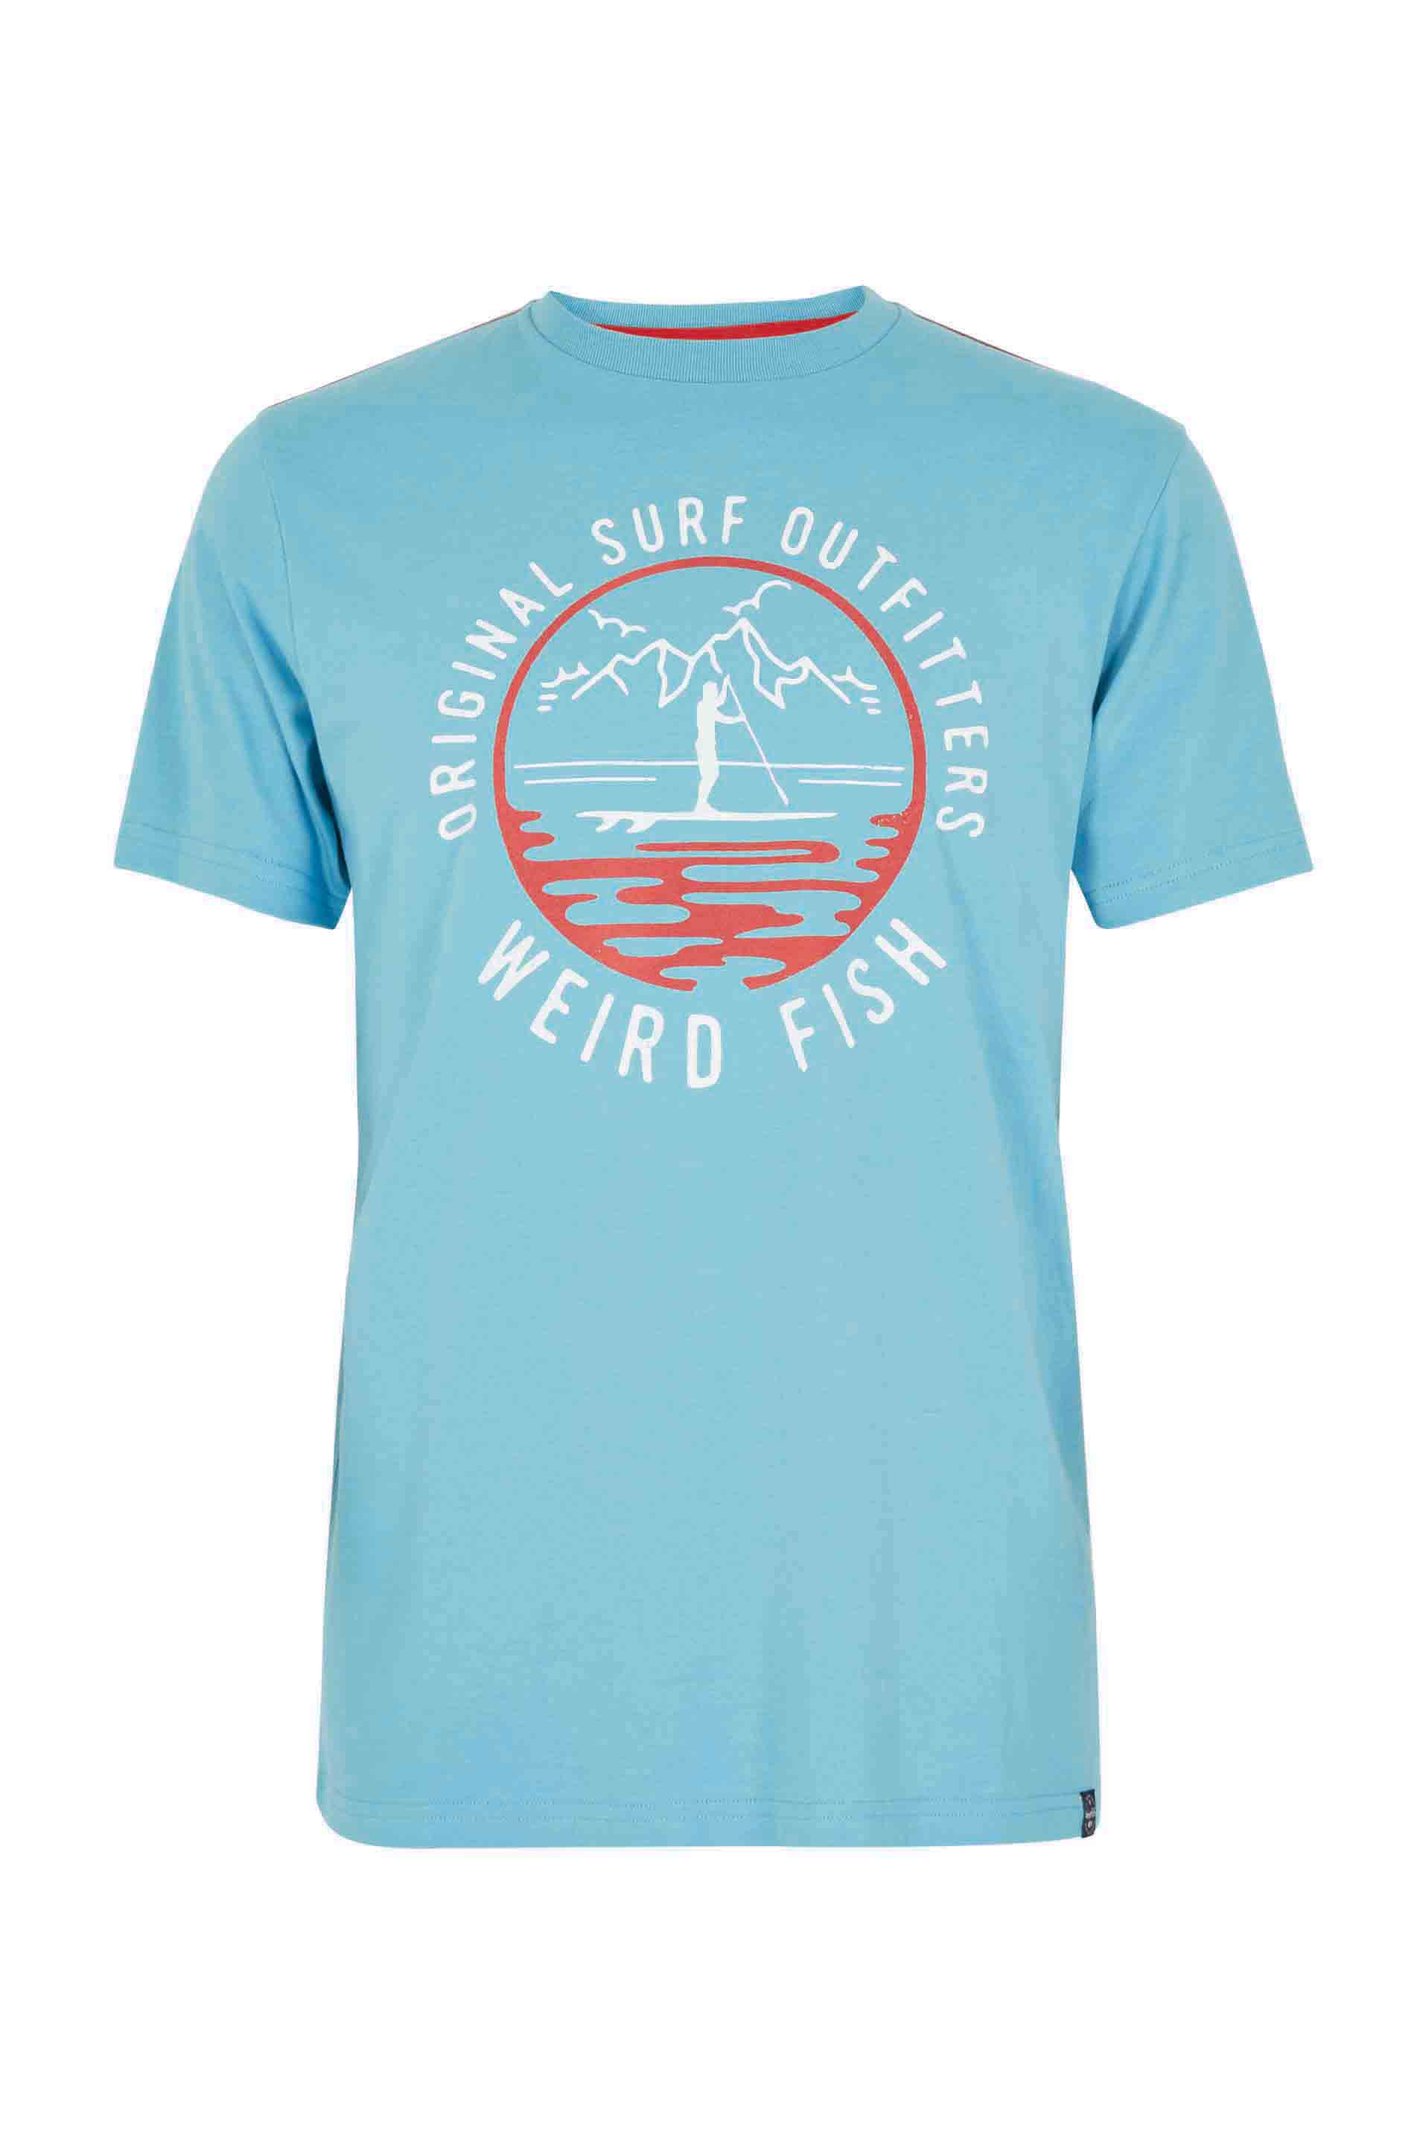 Weird Fish Paddle Eco Graphic T-Shirt Sky Blue Size 4XL